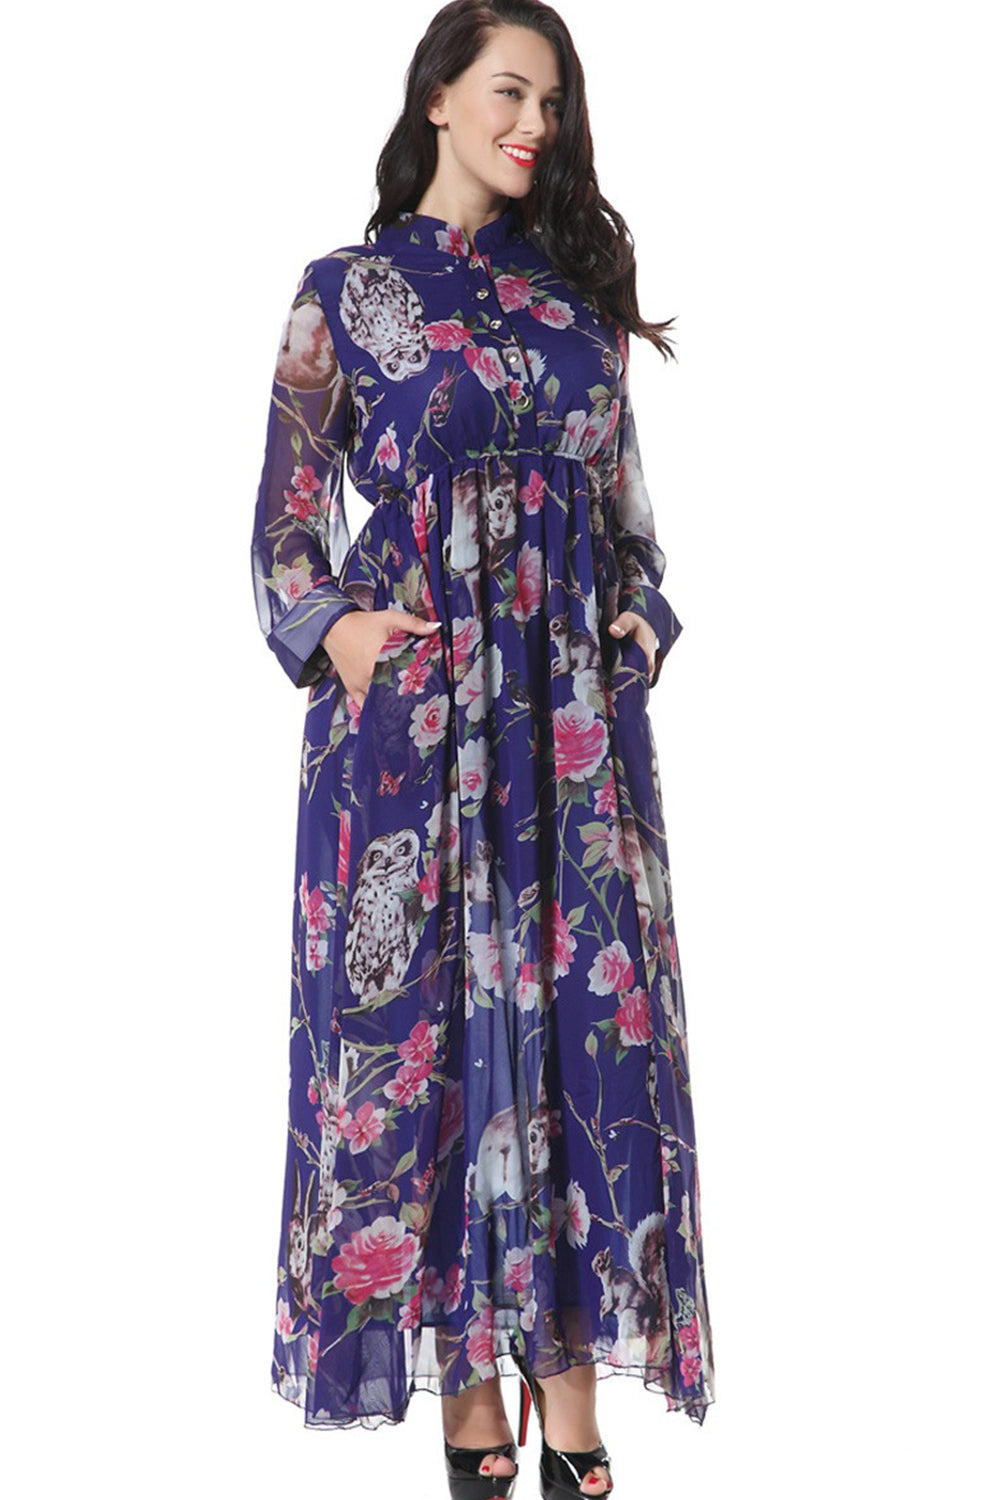 Ketty More Women Plus Size Collar Neck Floral Printed Decorated Maxi Dress-KMWD401